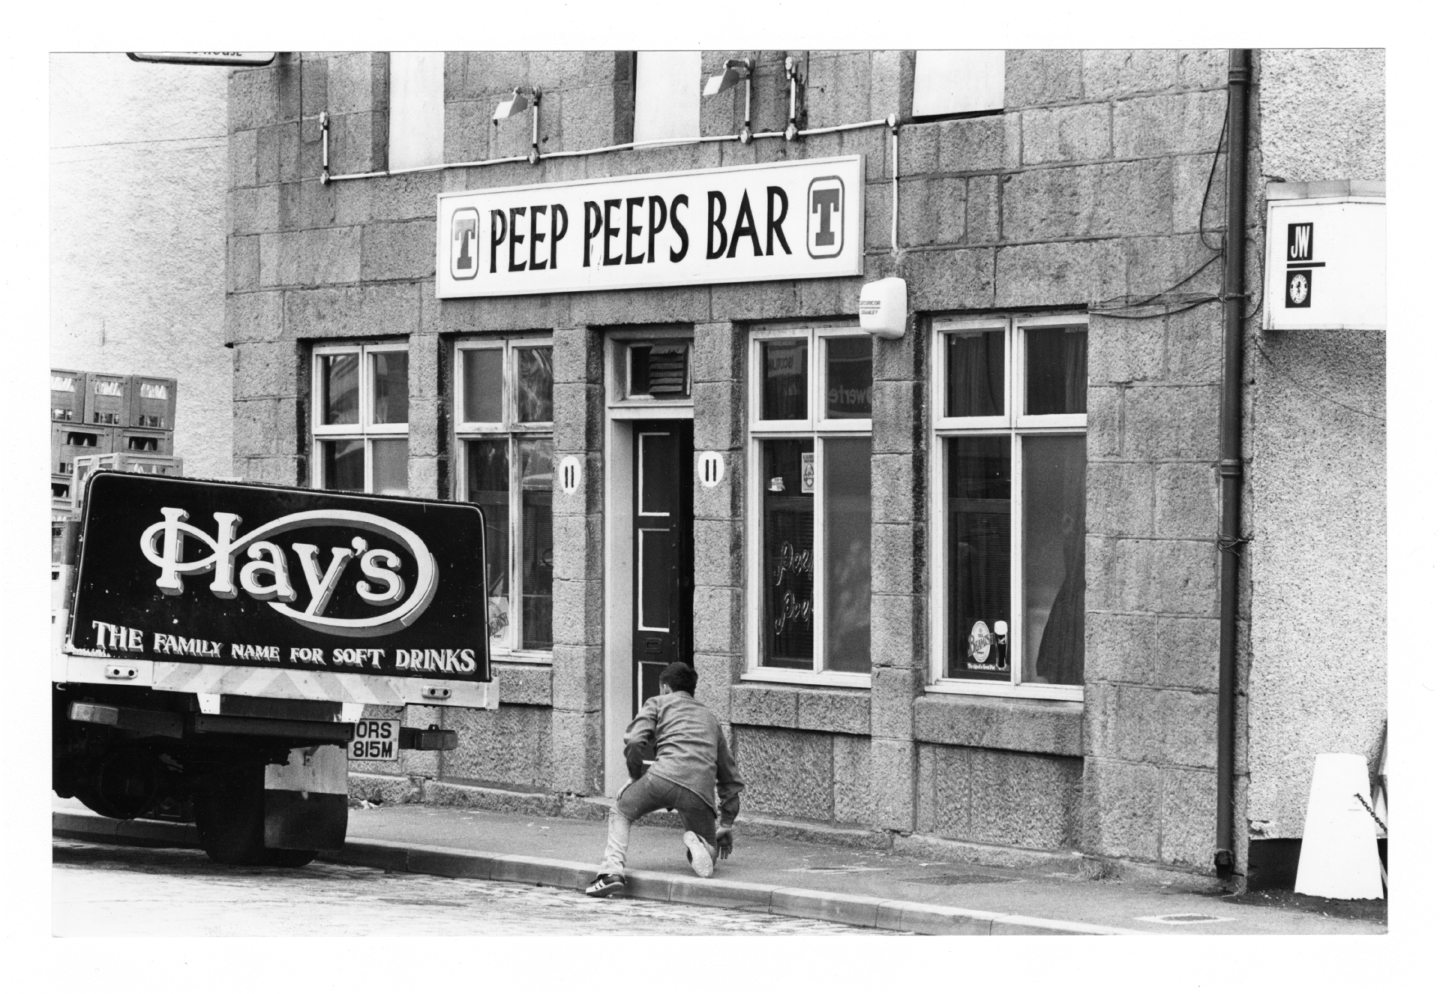 Peep Peeps on Commerce Street, once featured in a TV show as one of the toughest pubs in Britain, closed in 2013.